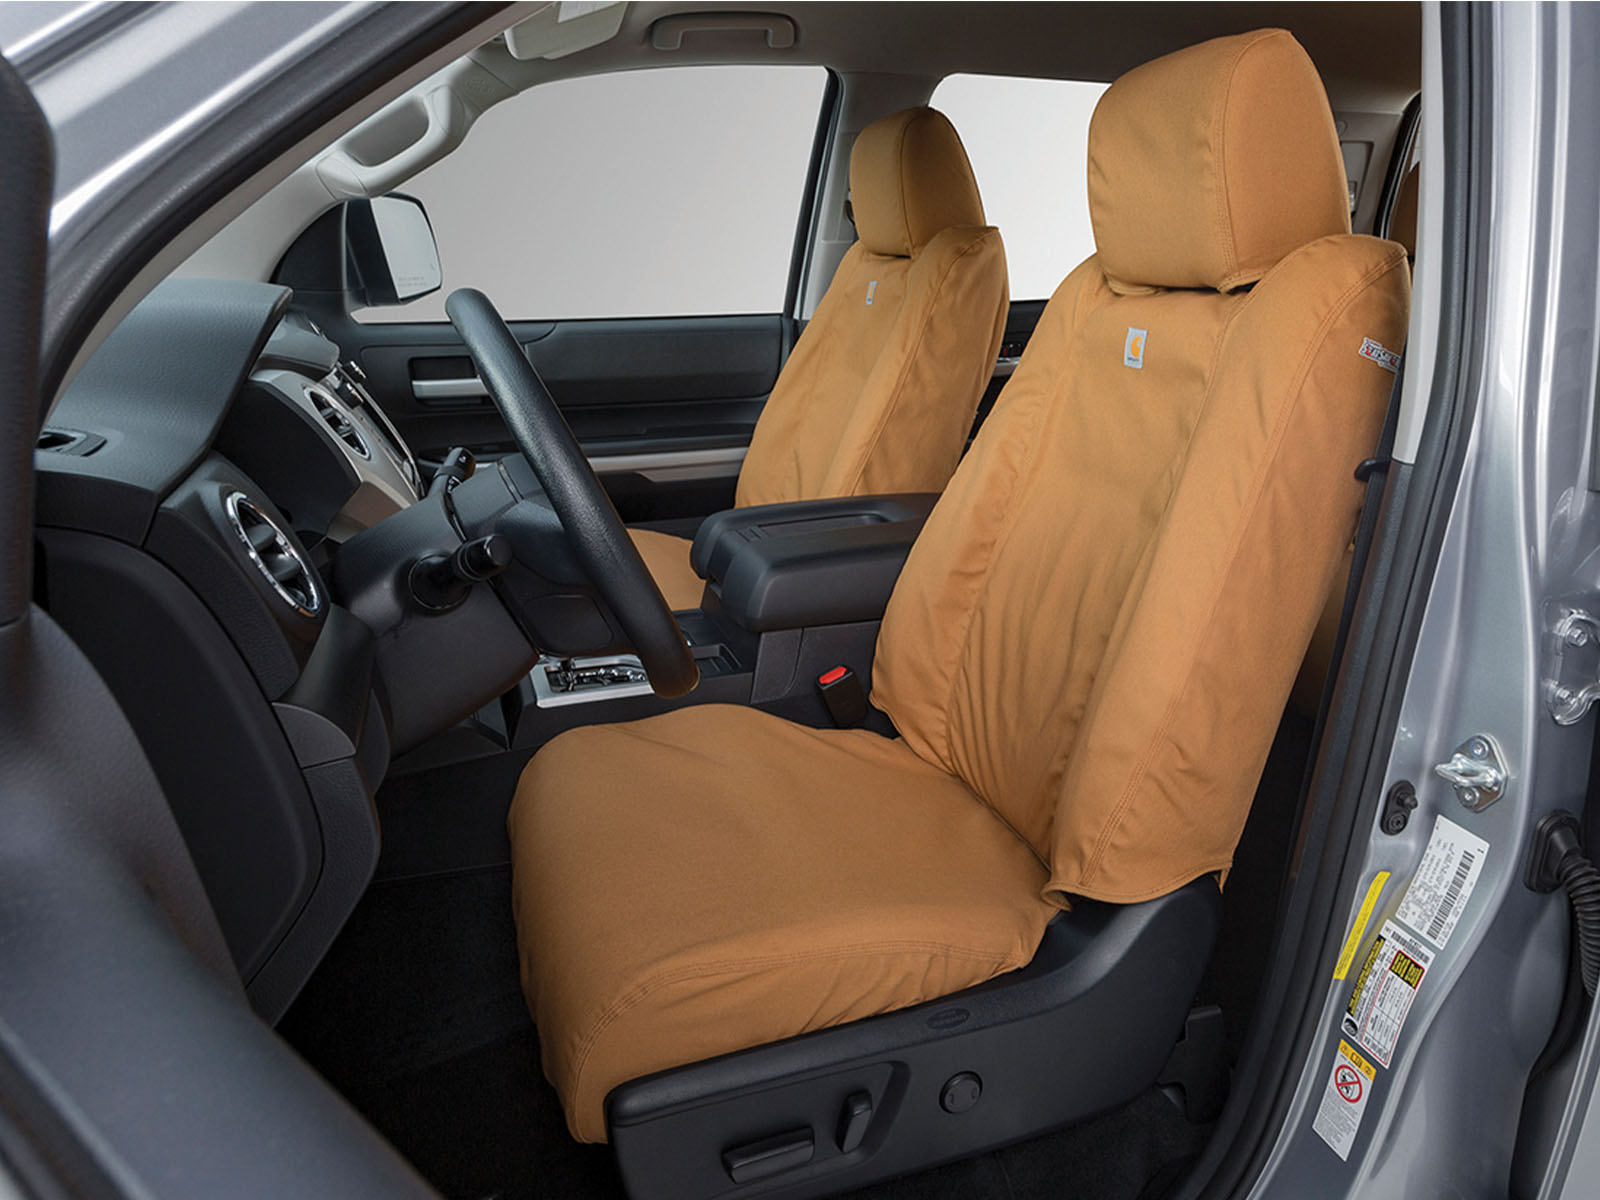 Seat Covers Leatherette For Nissan Titan Coverking Custom Fit